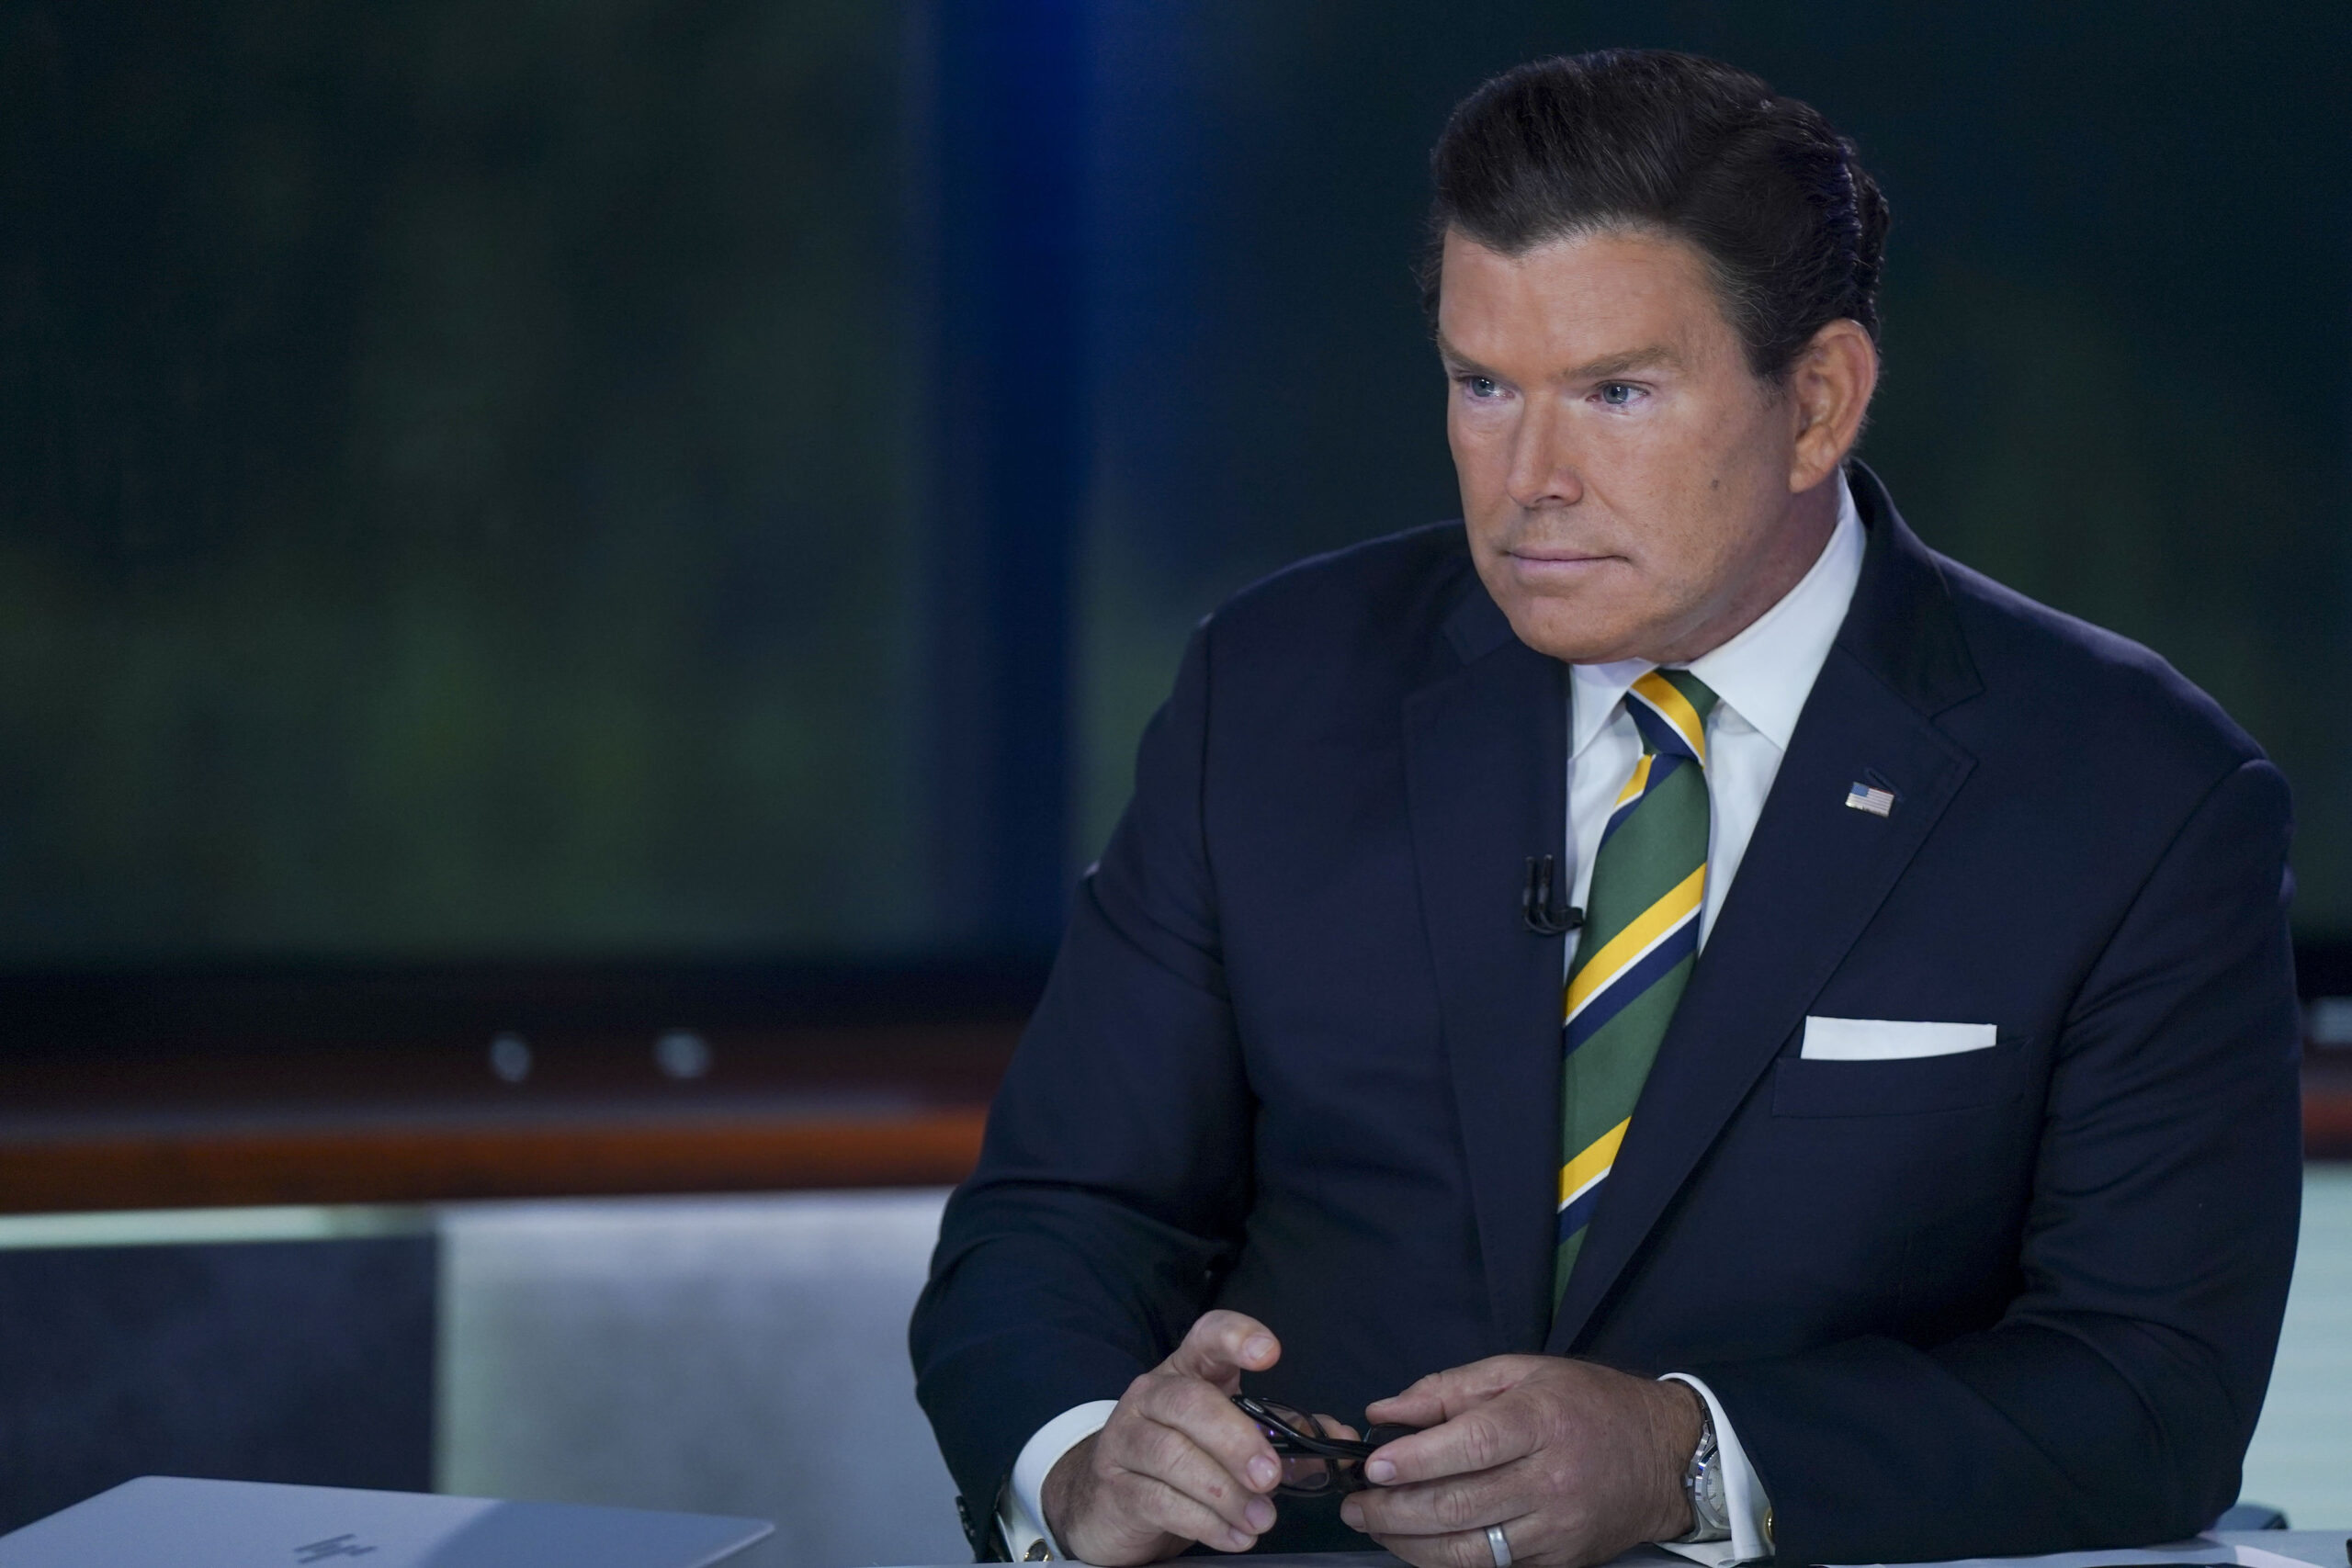 Trump Praises Fox News Anchor Bret Baier Over Report on 2020 Arizona Election Email